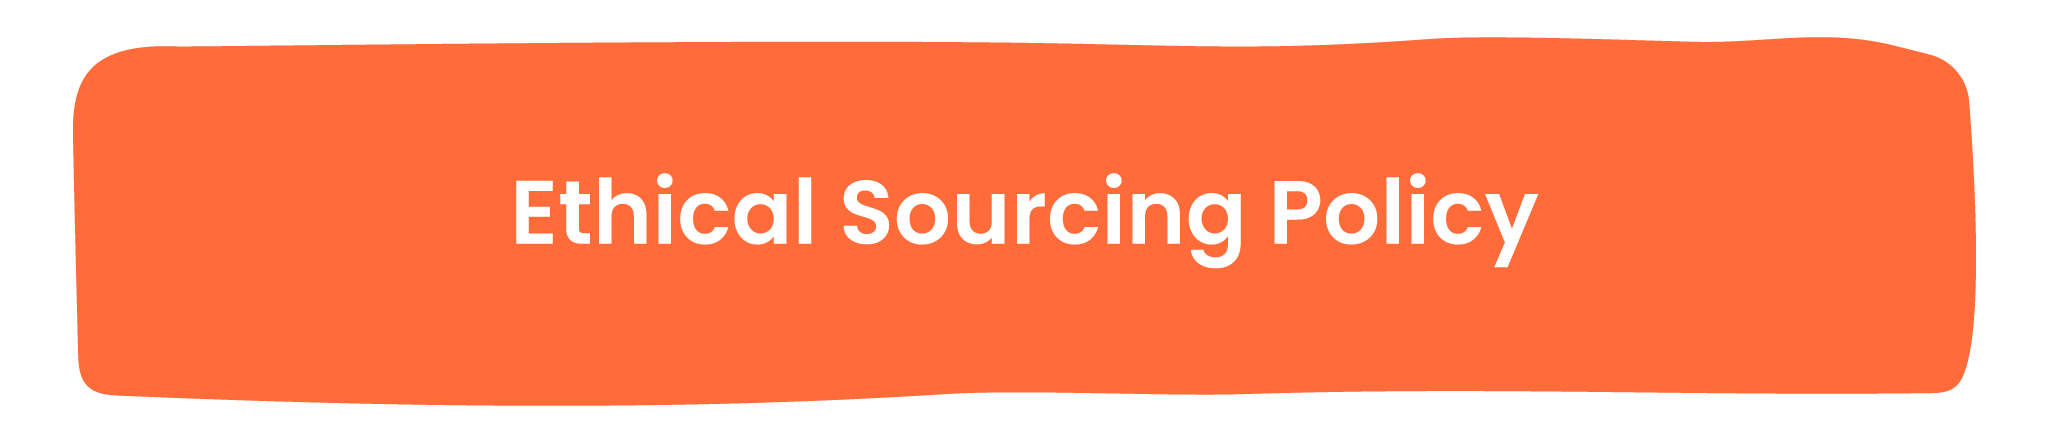 Ethical Sourcing Policy